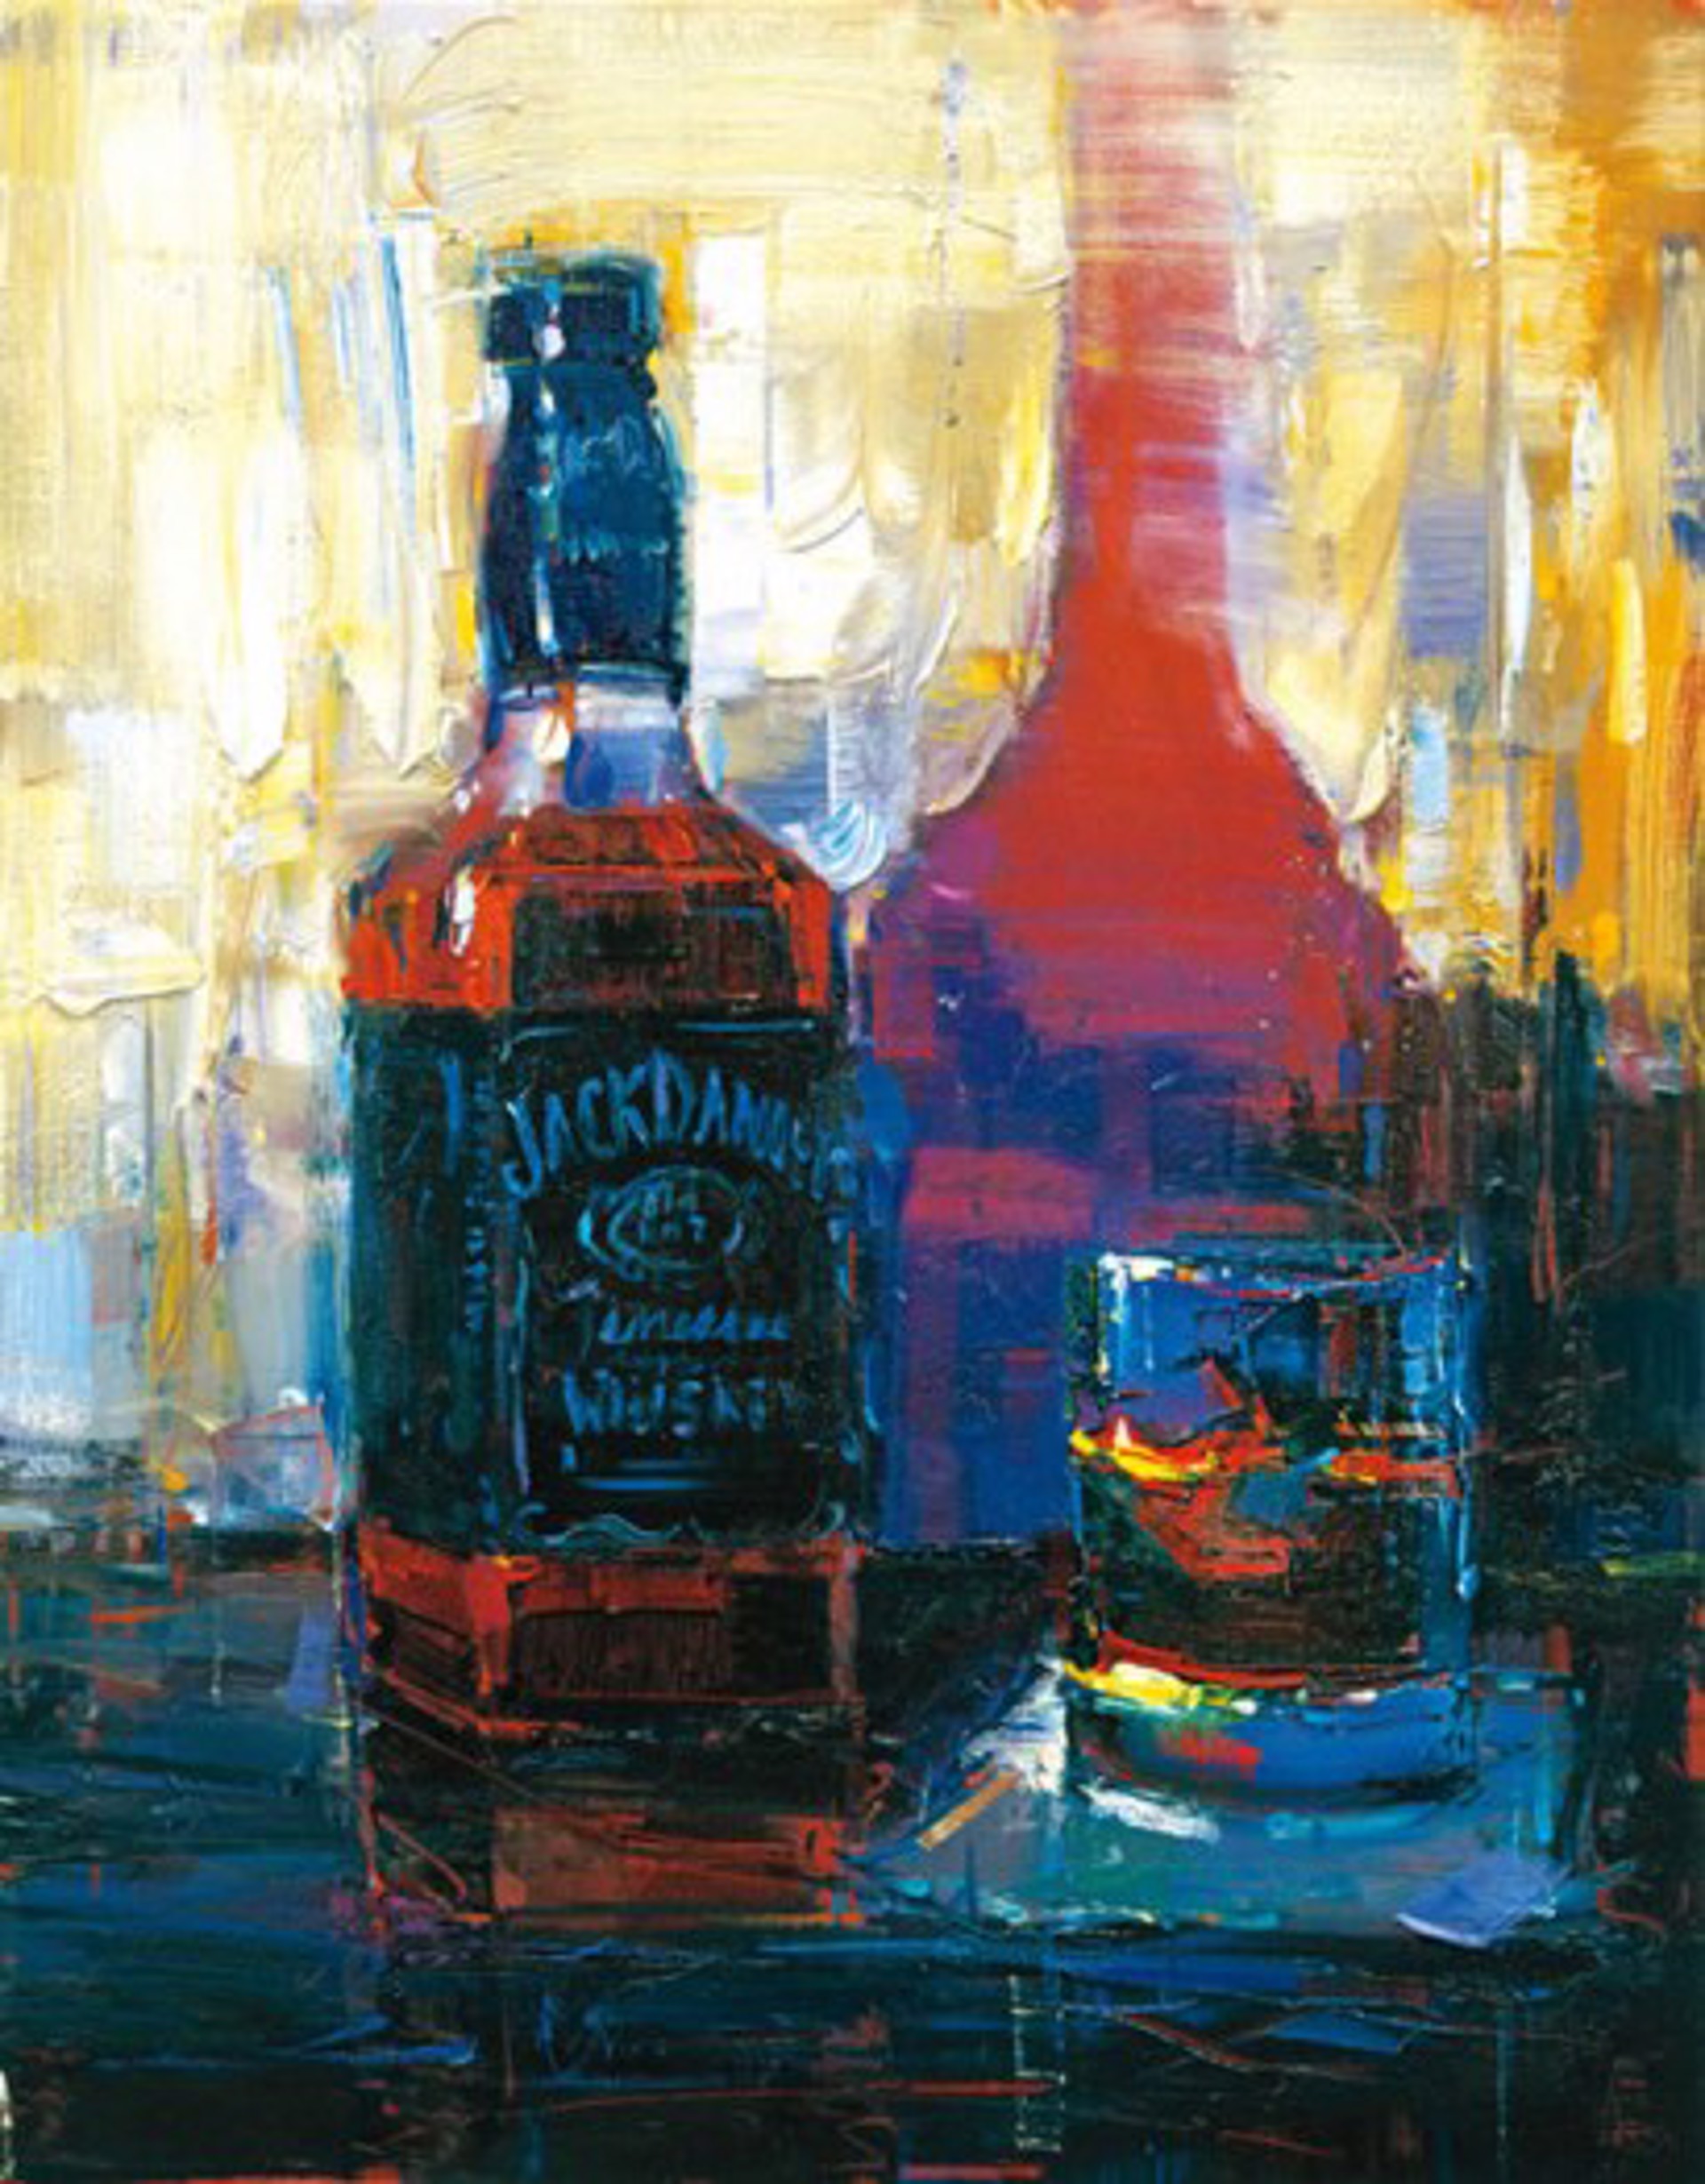 Gentleman's Jack Sell off Floor - Sold Out by Michael Flohr